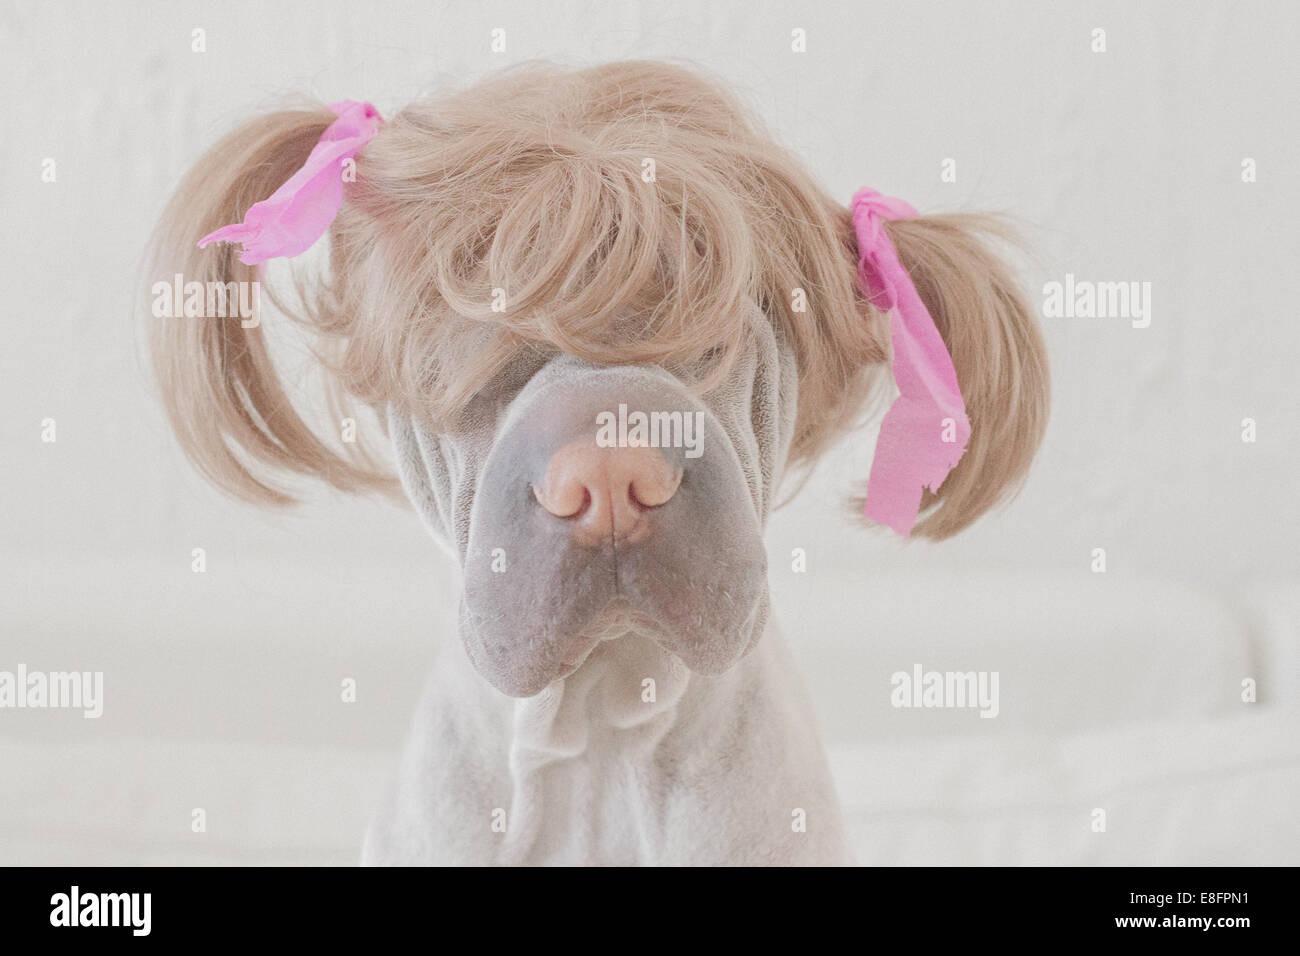 Shar pei dog wearing a wig with pigtails Stock Photo